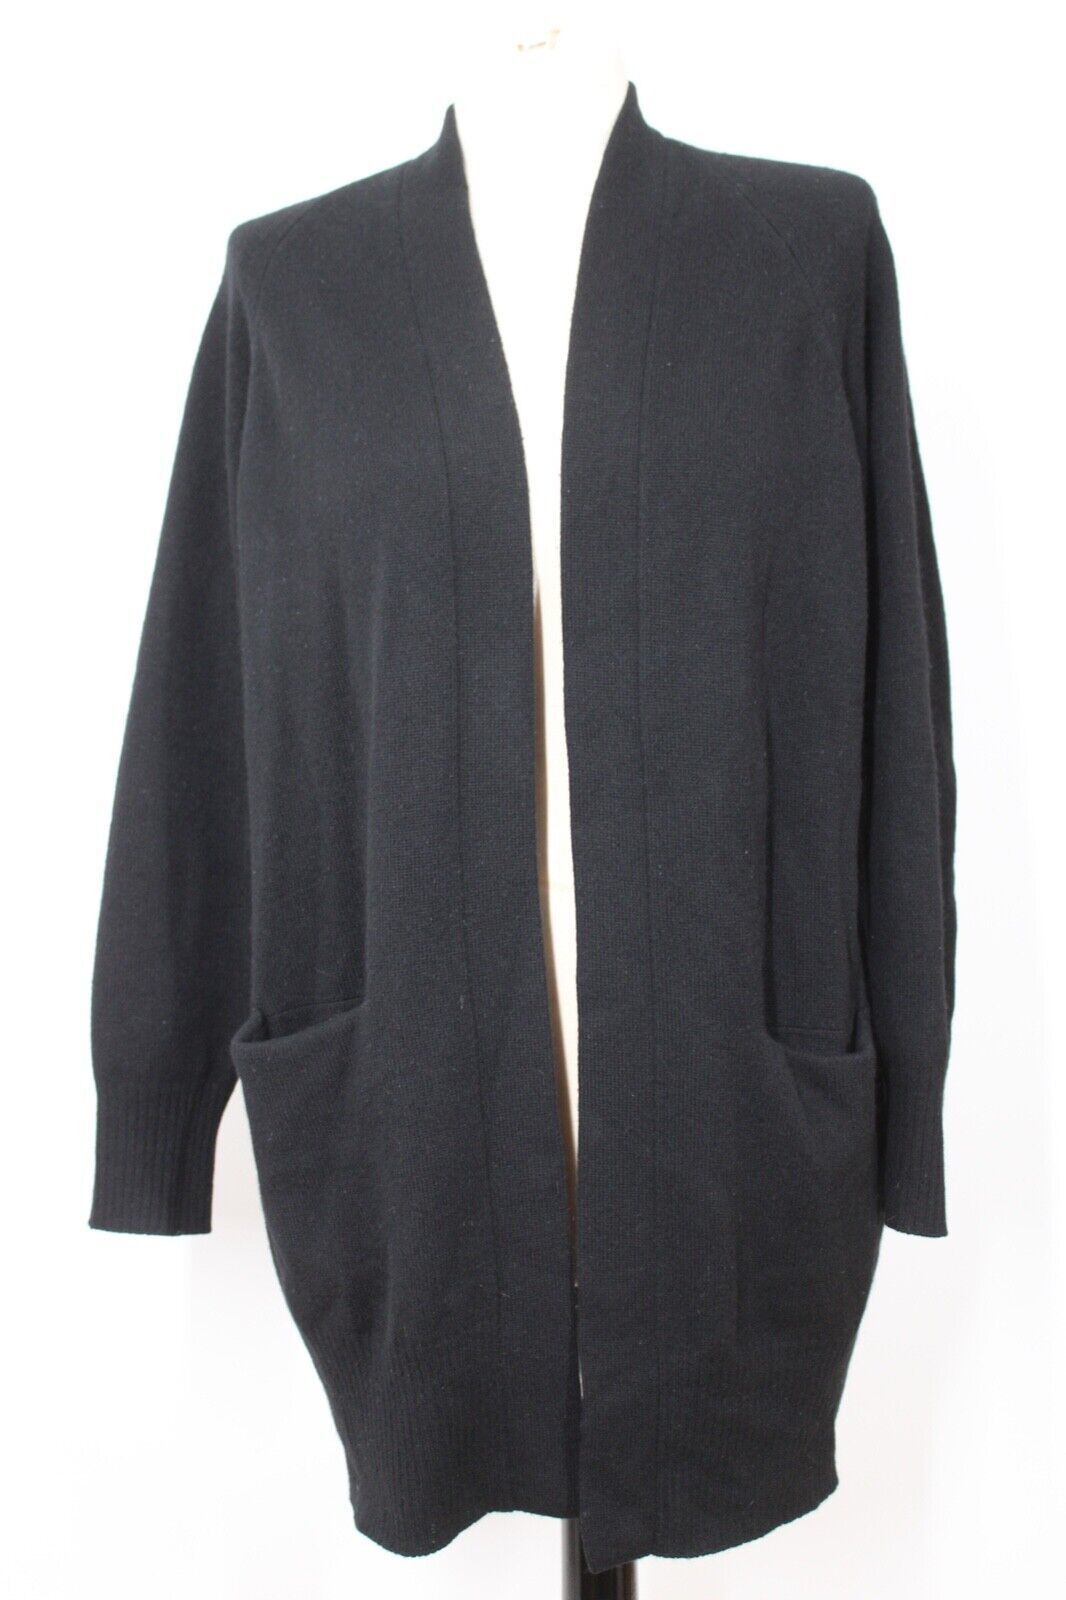 Primary image for Vince XS Black Cashmere Raglan Sleeve Open-Front Long Cardigan Sweater Pockets